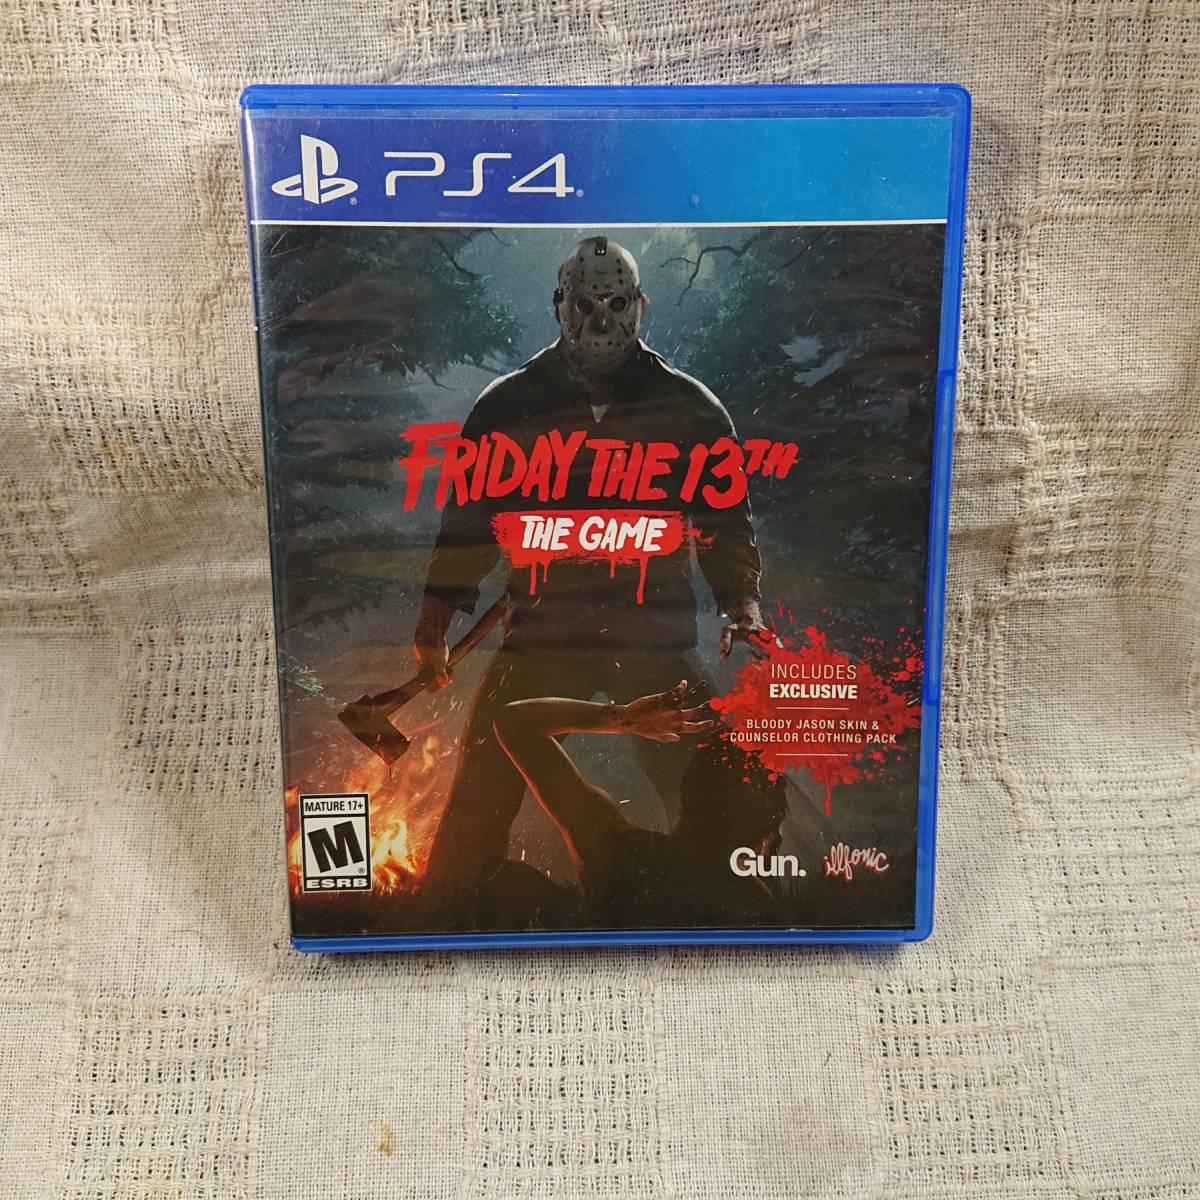 [Ab] PS4 Play Station 4 Friday The 13th The Game 輸入版　 　定形外郵便250円発送_画像1